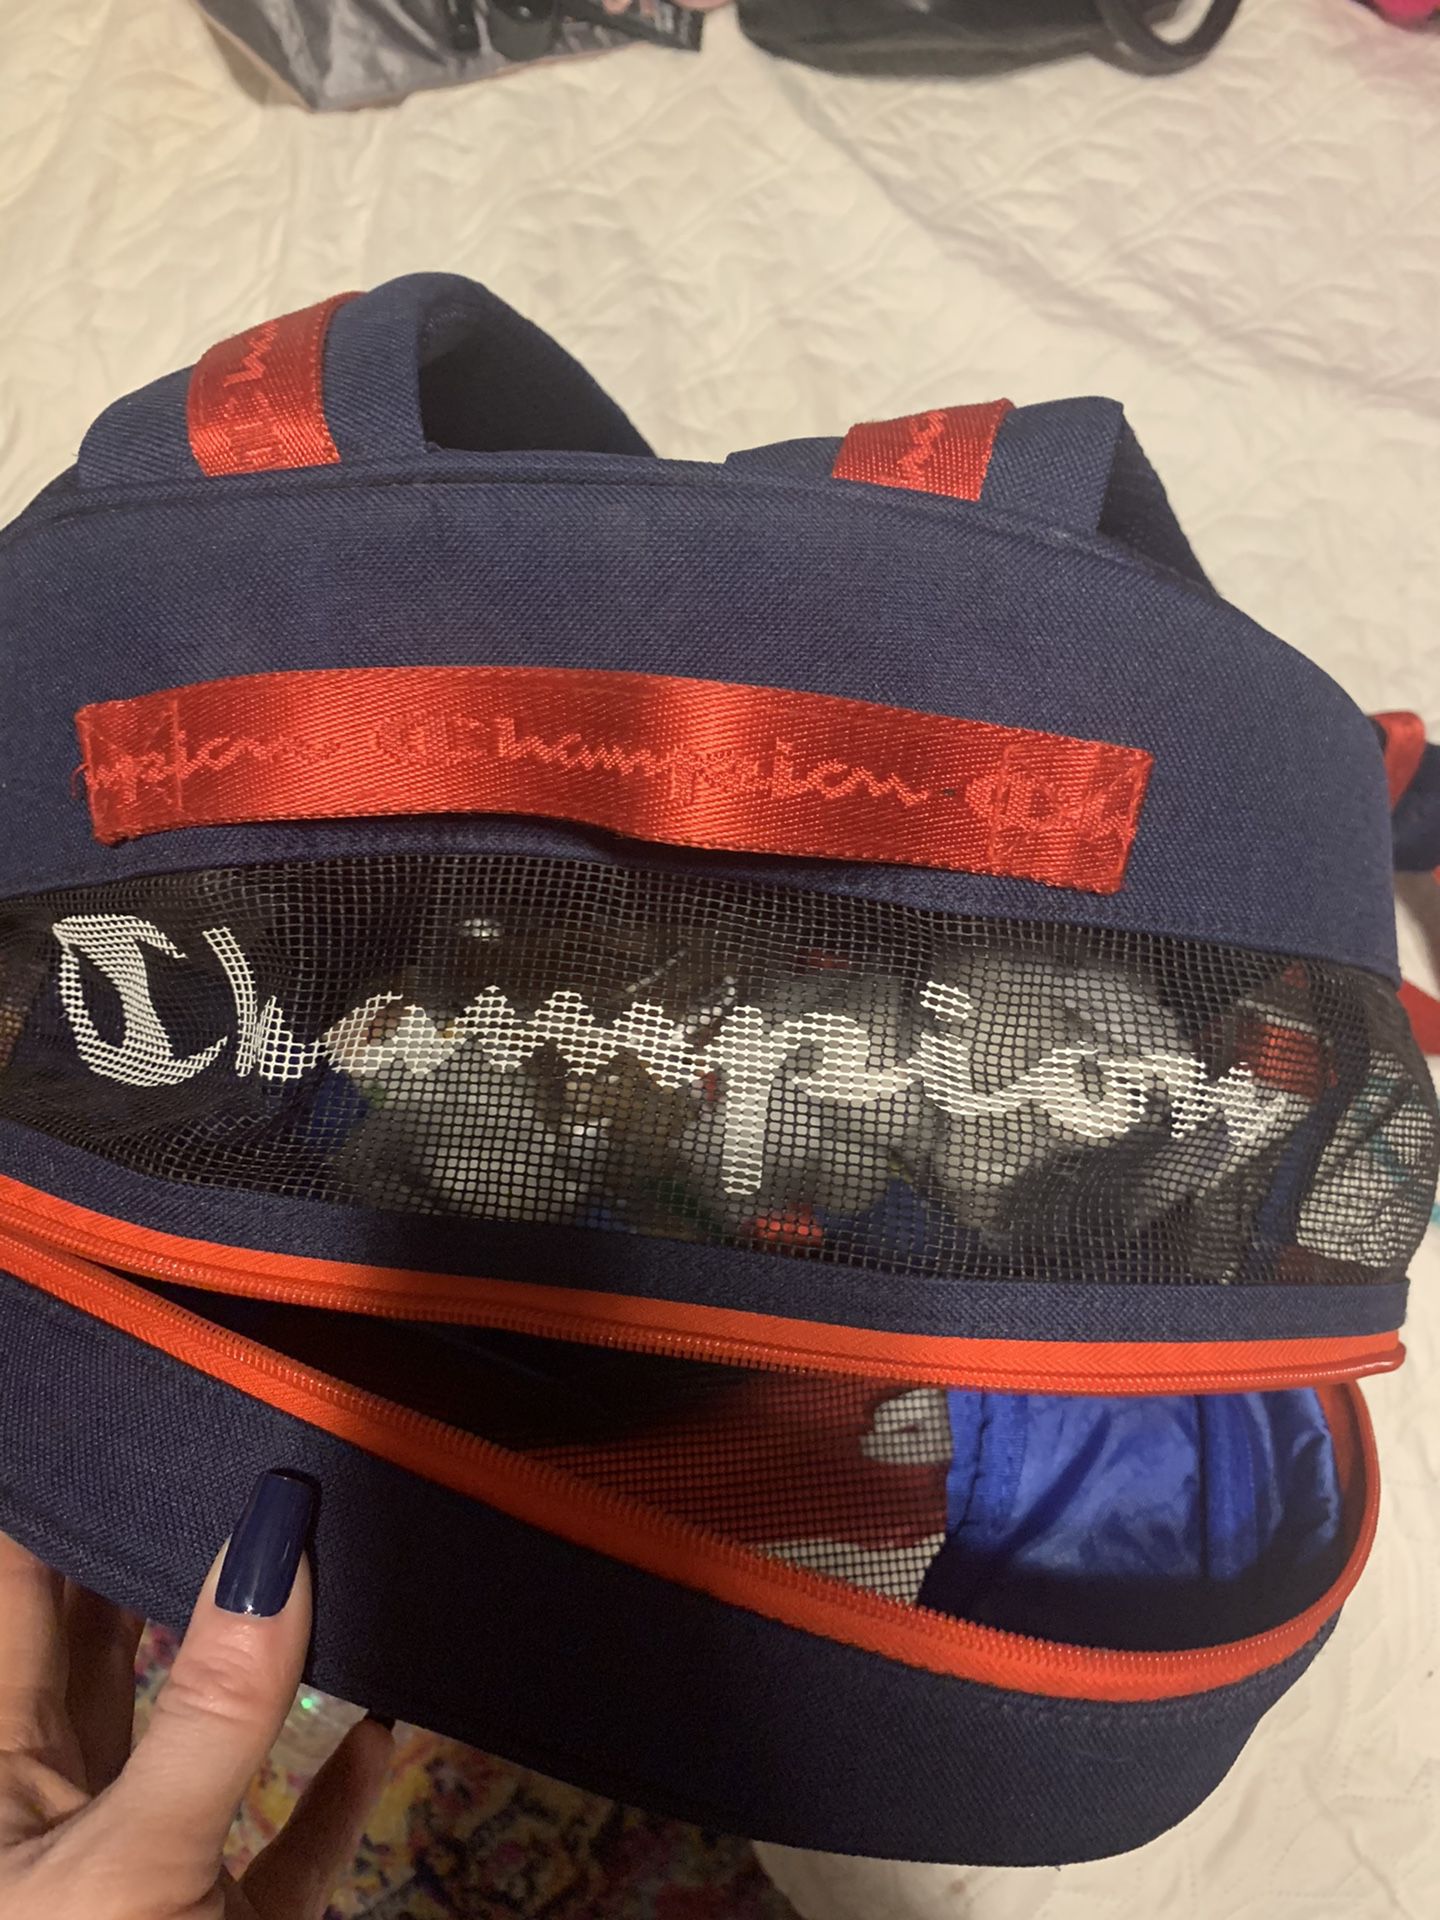 Champion Dog Backpack With Outfits And Leashes